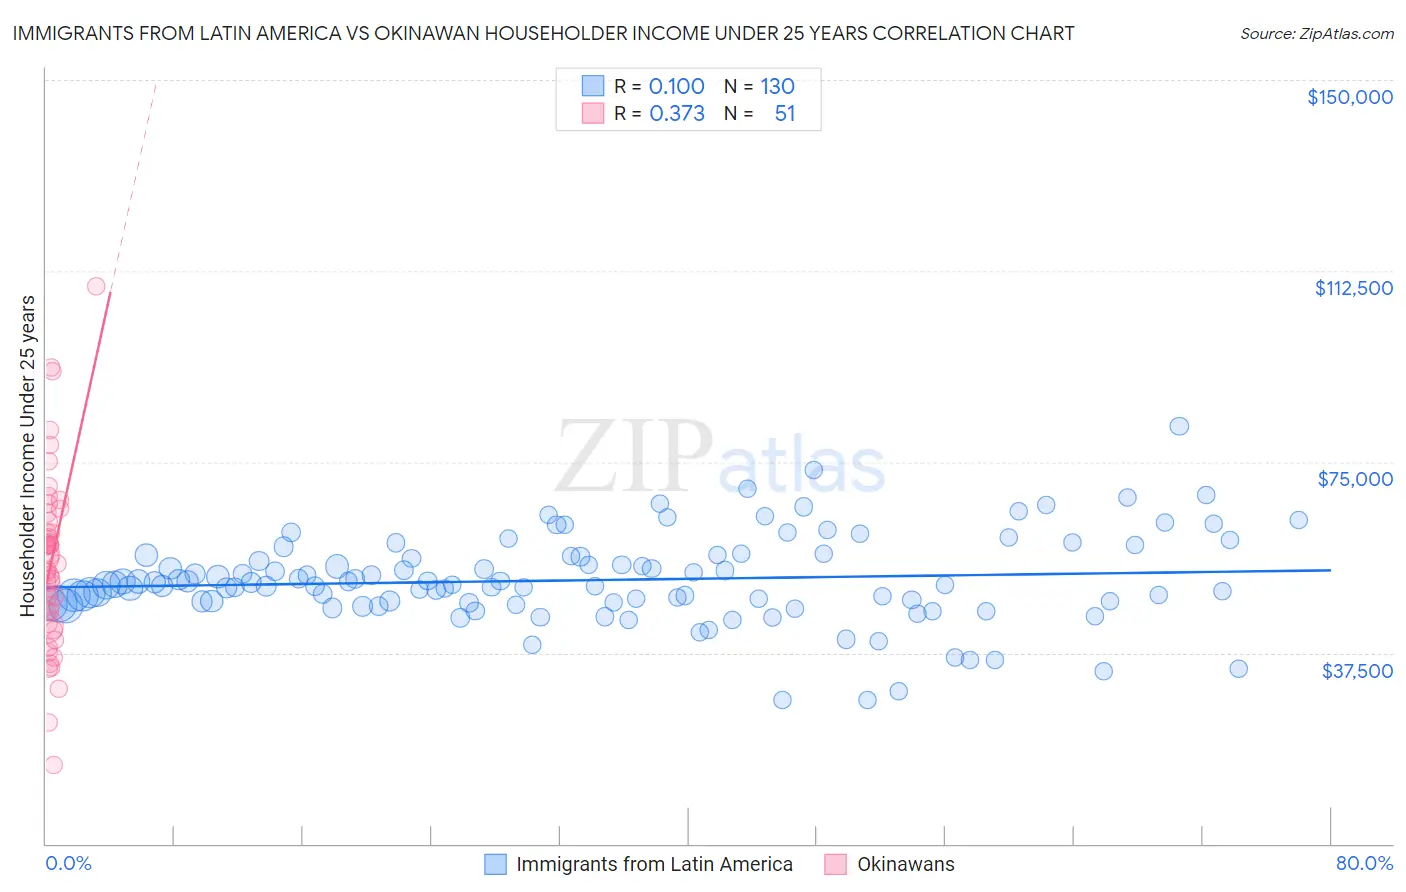 Immigrants from Latin America vs Okinawan Householder Income Under 25 years